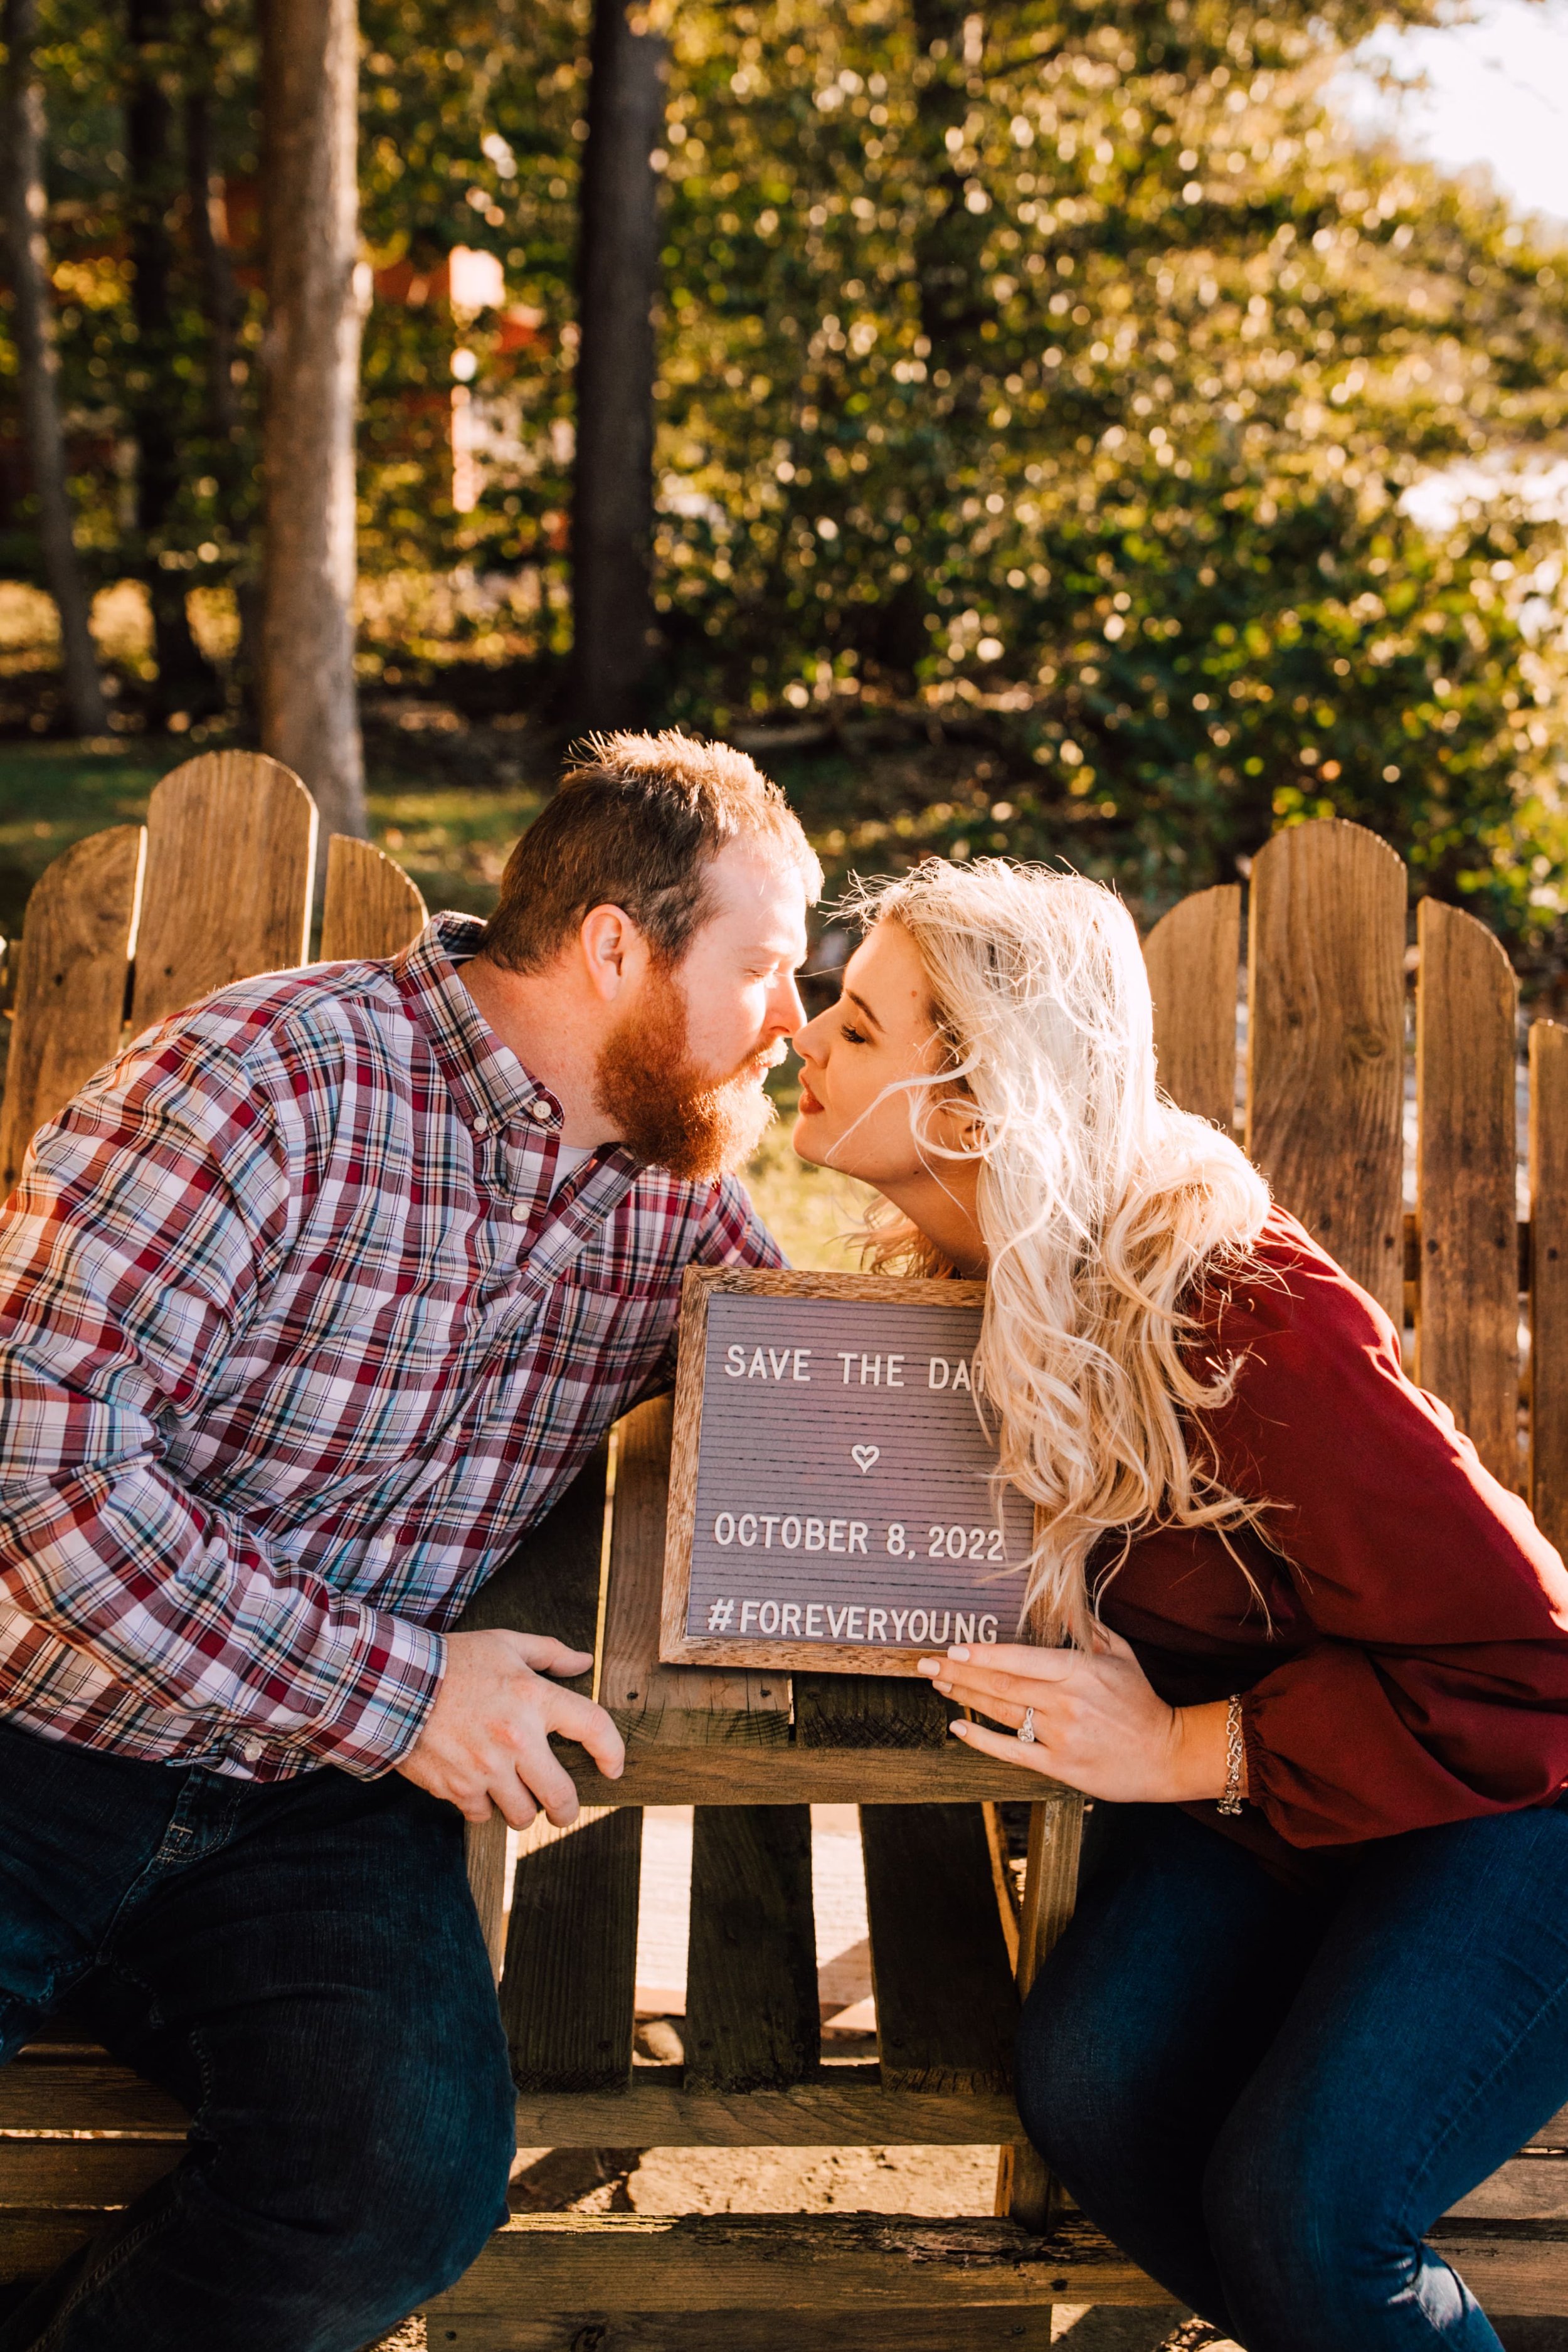  engaged couple lean in for a kiss while they hold a letterboard during their sunset engagement photos that spells out “save the date &lt;3 october 8, 2022 #foreveryoung”  